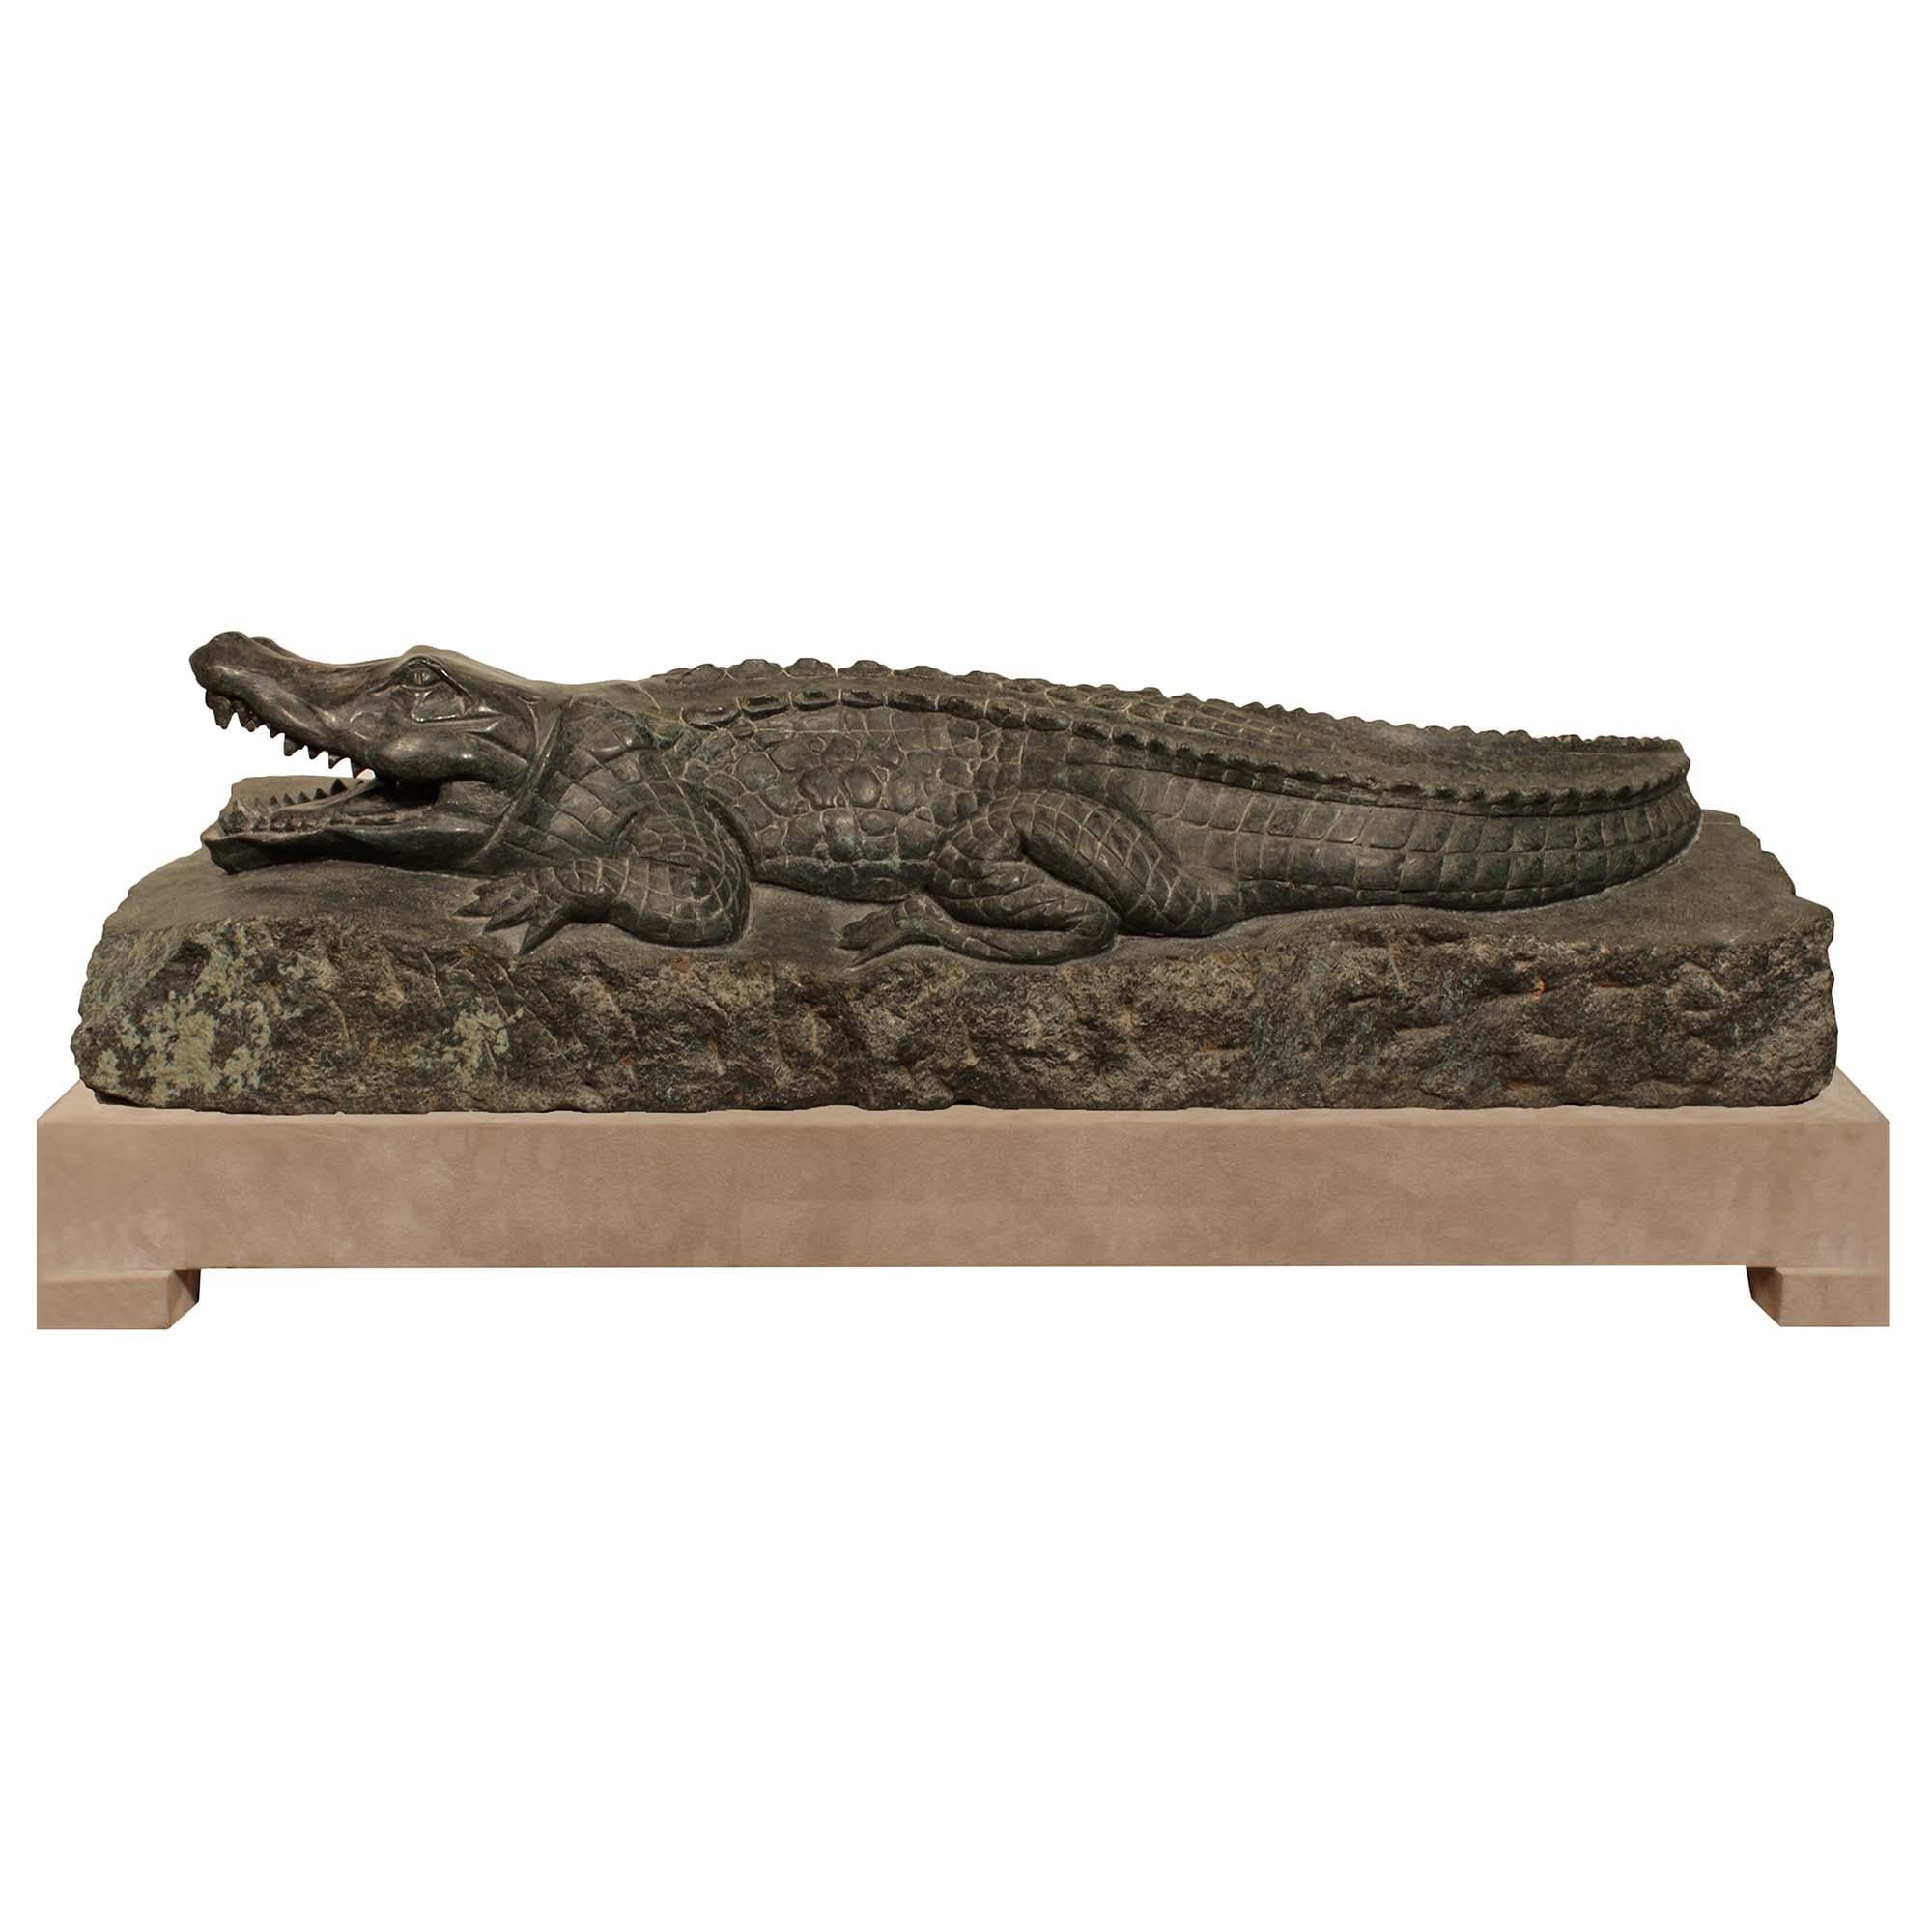 Italian 19th Century Verde Prato Marble Alligator Sculpture, from Florence For Sale 5